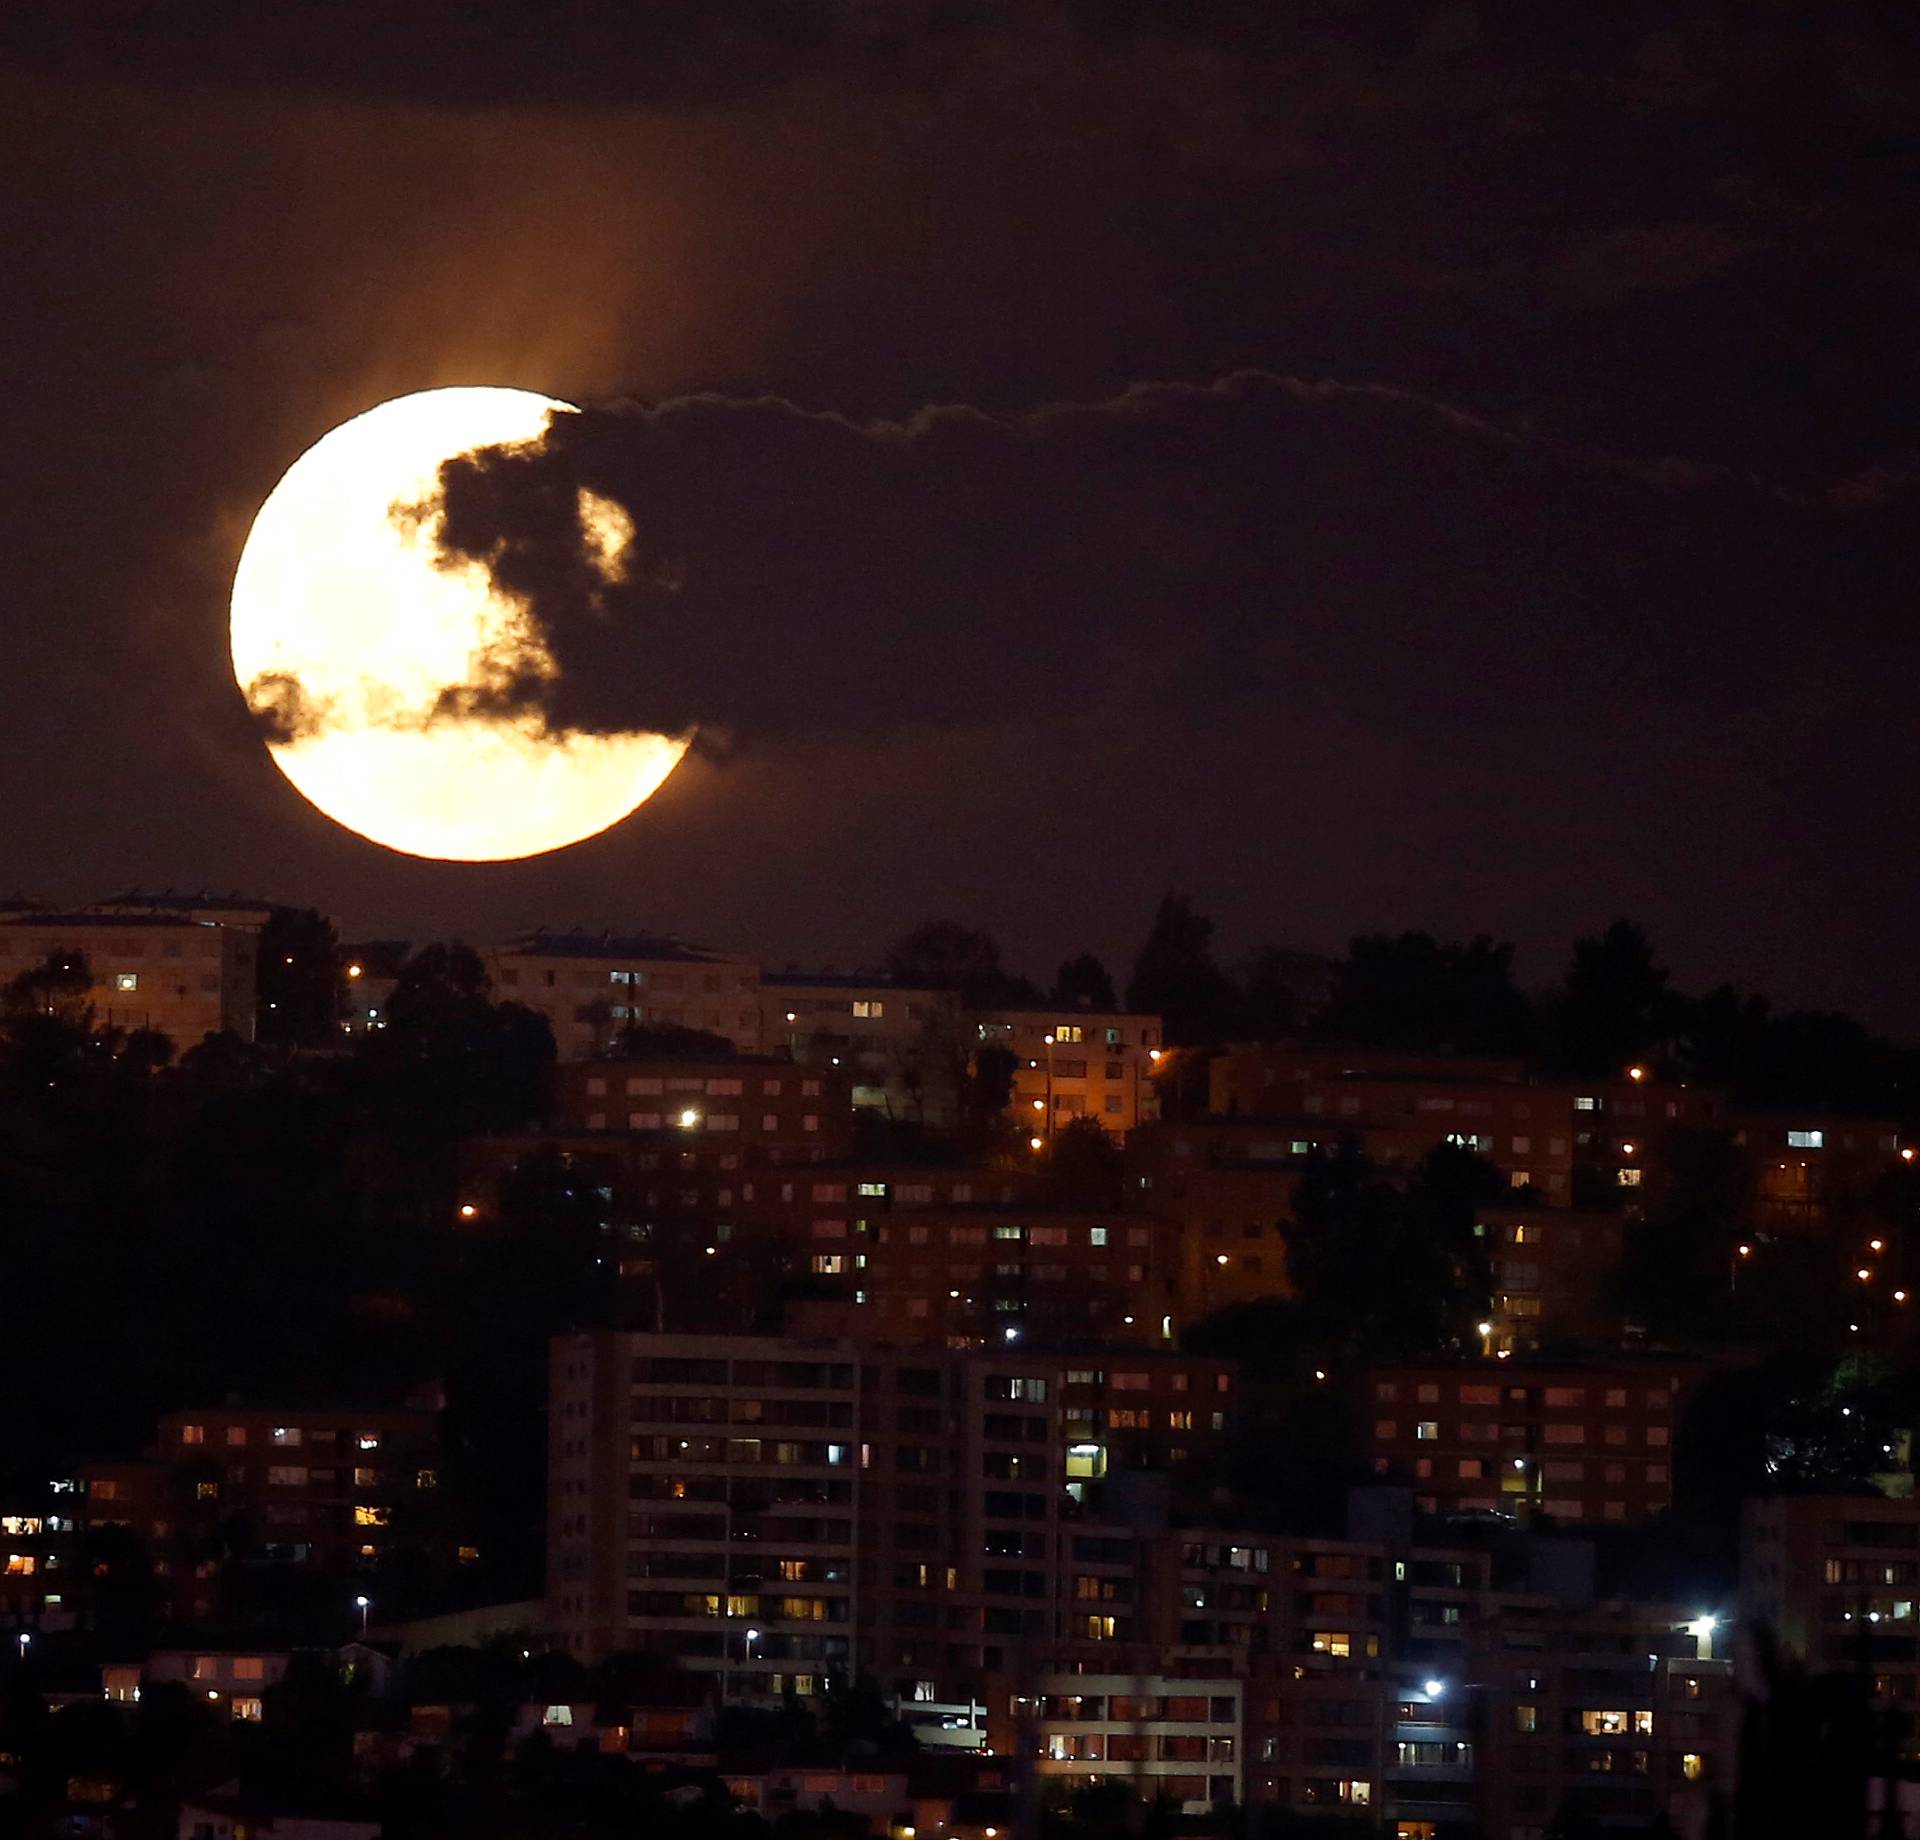 A supermoon rises in the sky at the city of Vina del Mar